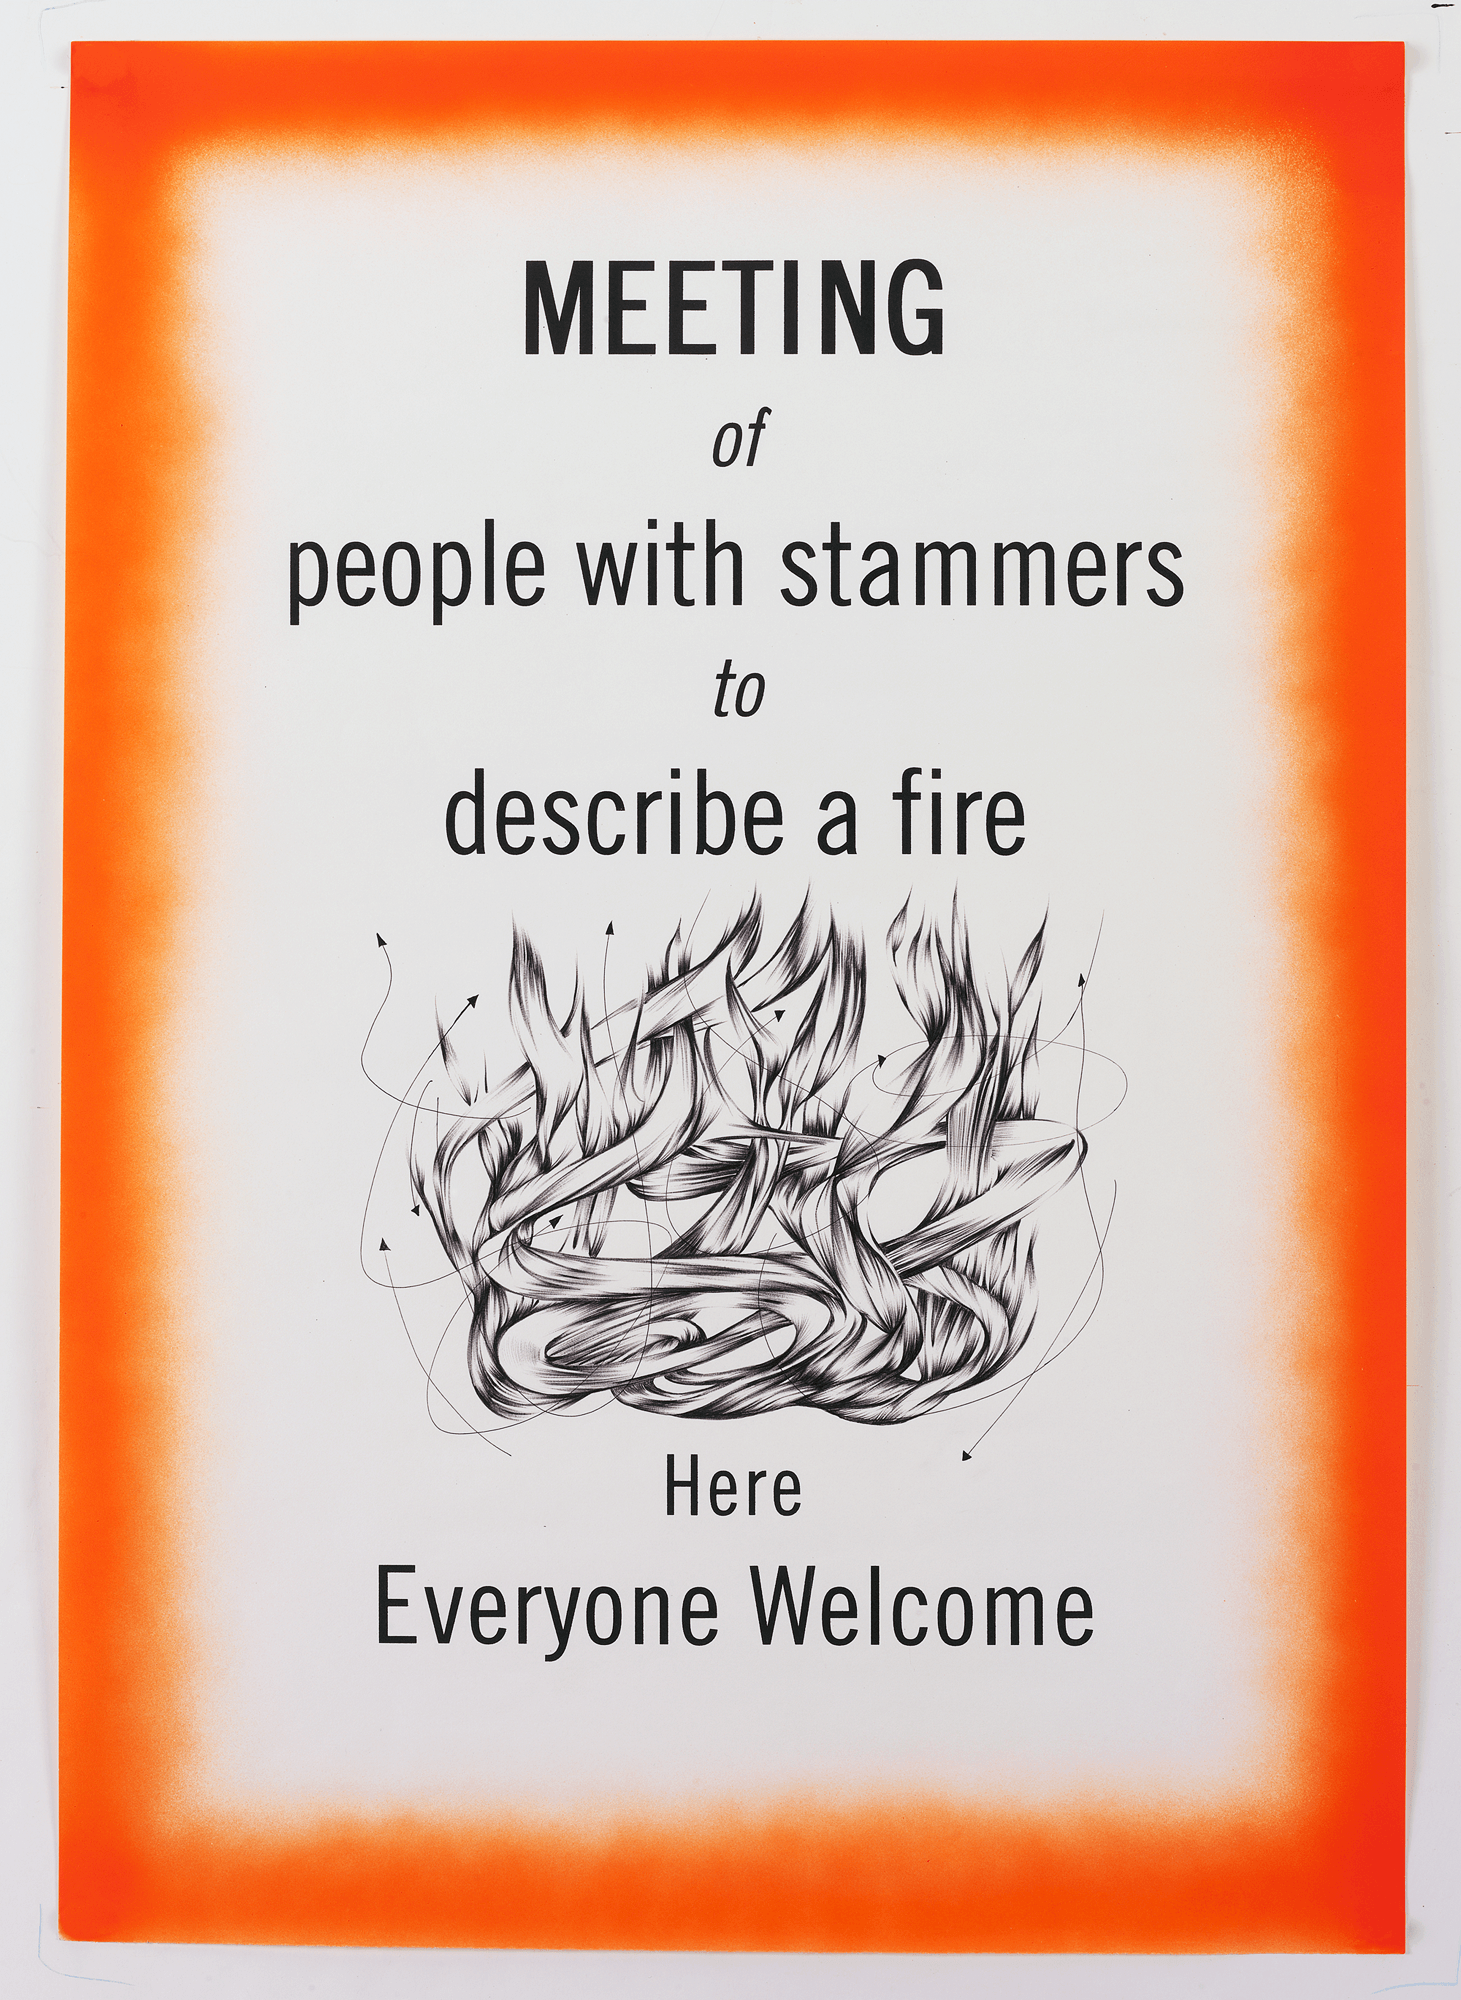 Meetings of people with stammers to describe a fire (1999-) - Adam Chodzko